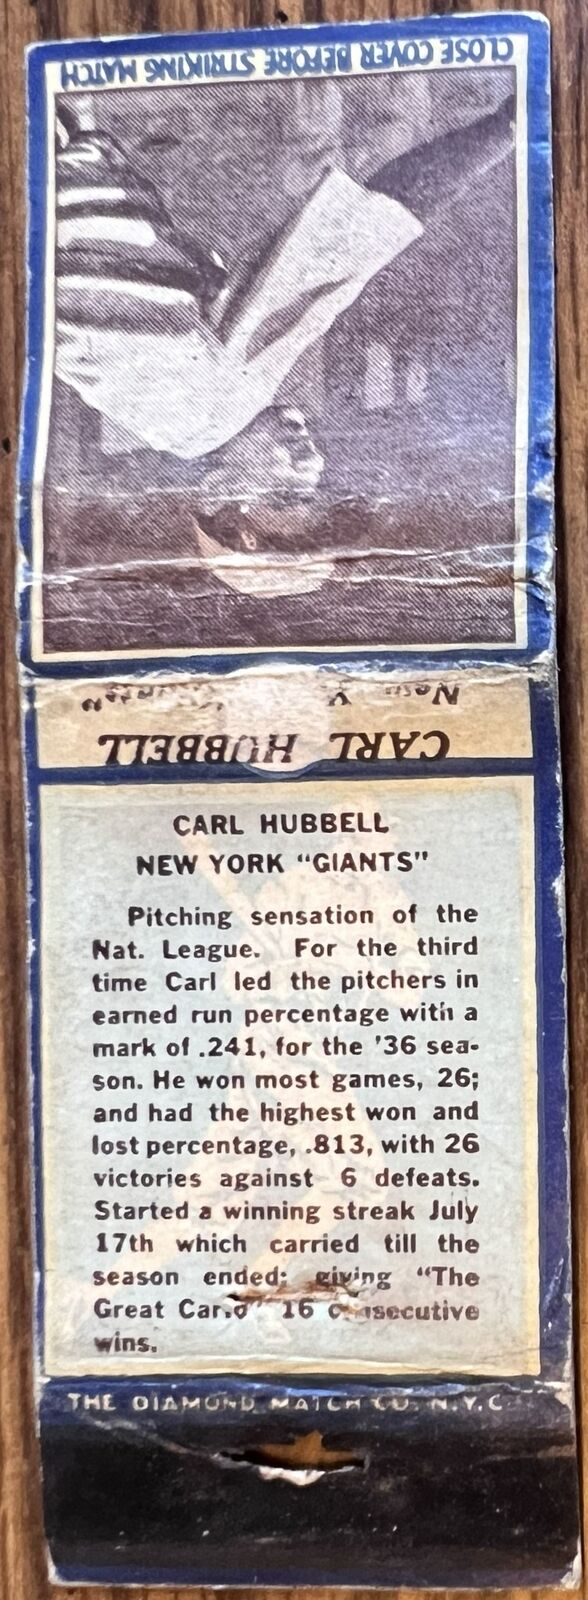 Carl Hubbell Pitcher New York Giants Vintage Matchbook Cover